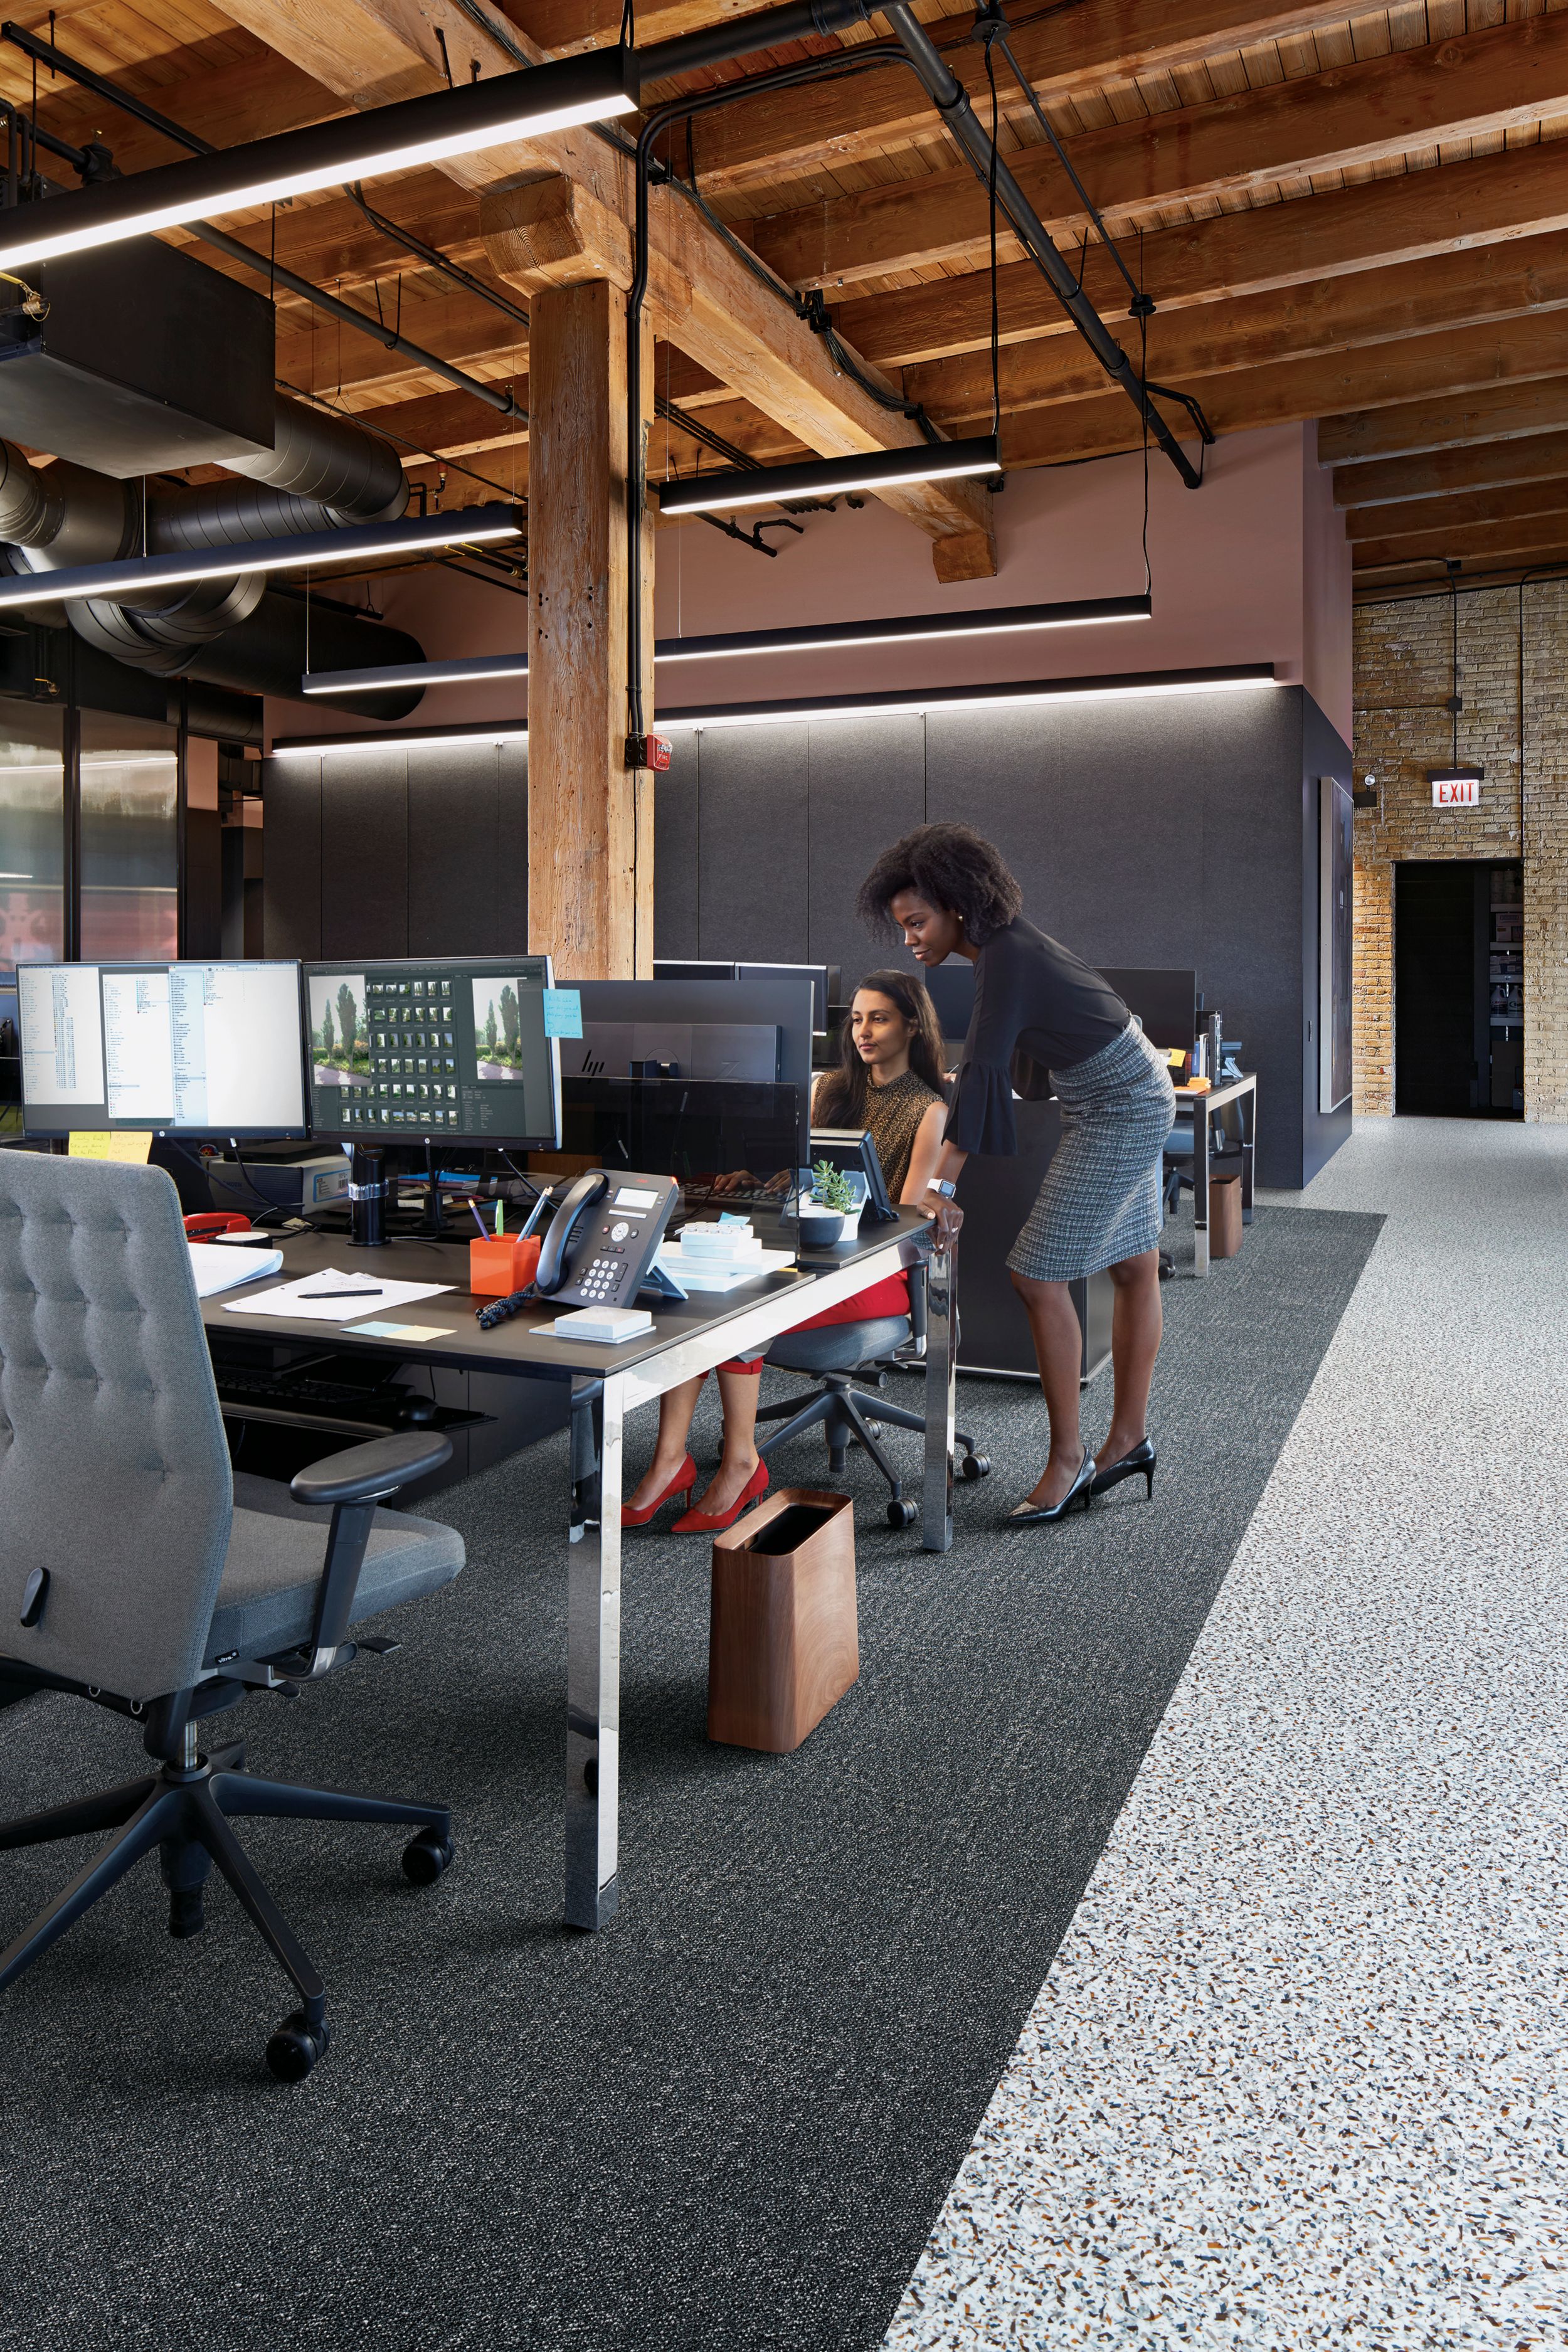 Interface Step it Up and Walk on By carpet tile in common work space with two people Bildnummer 8